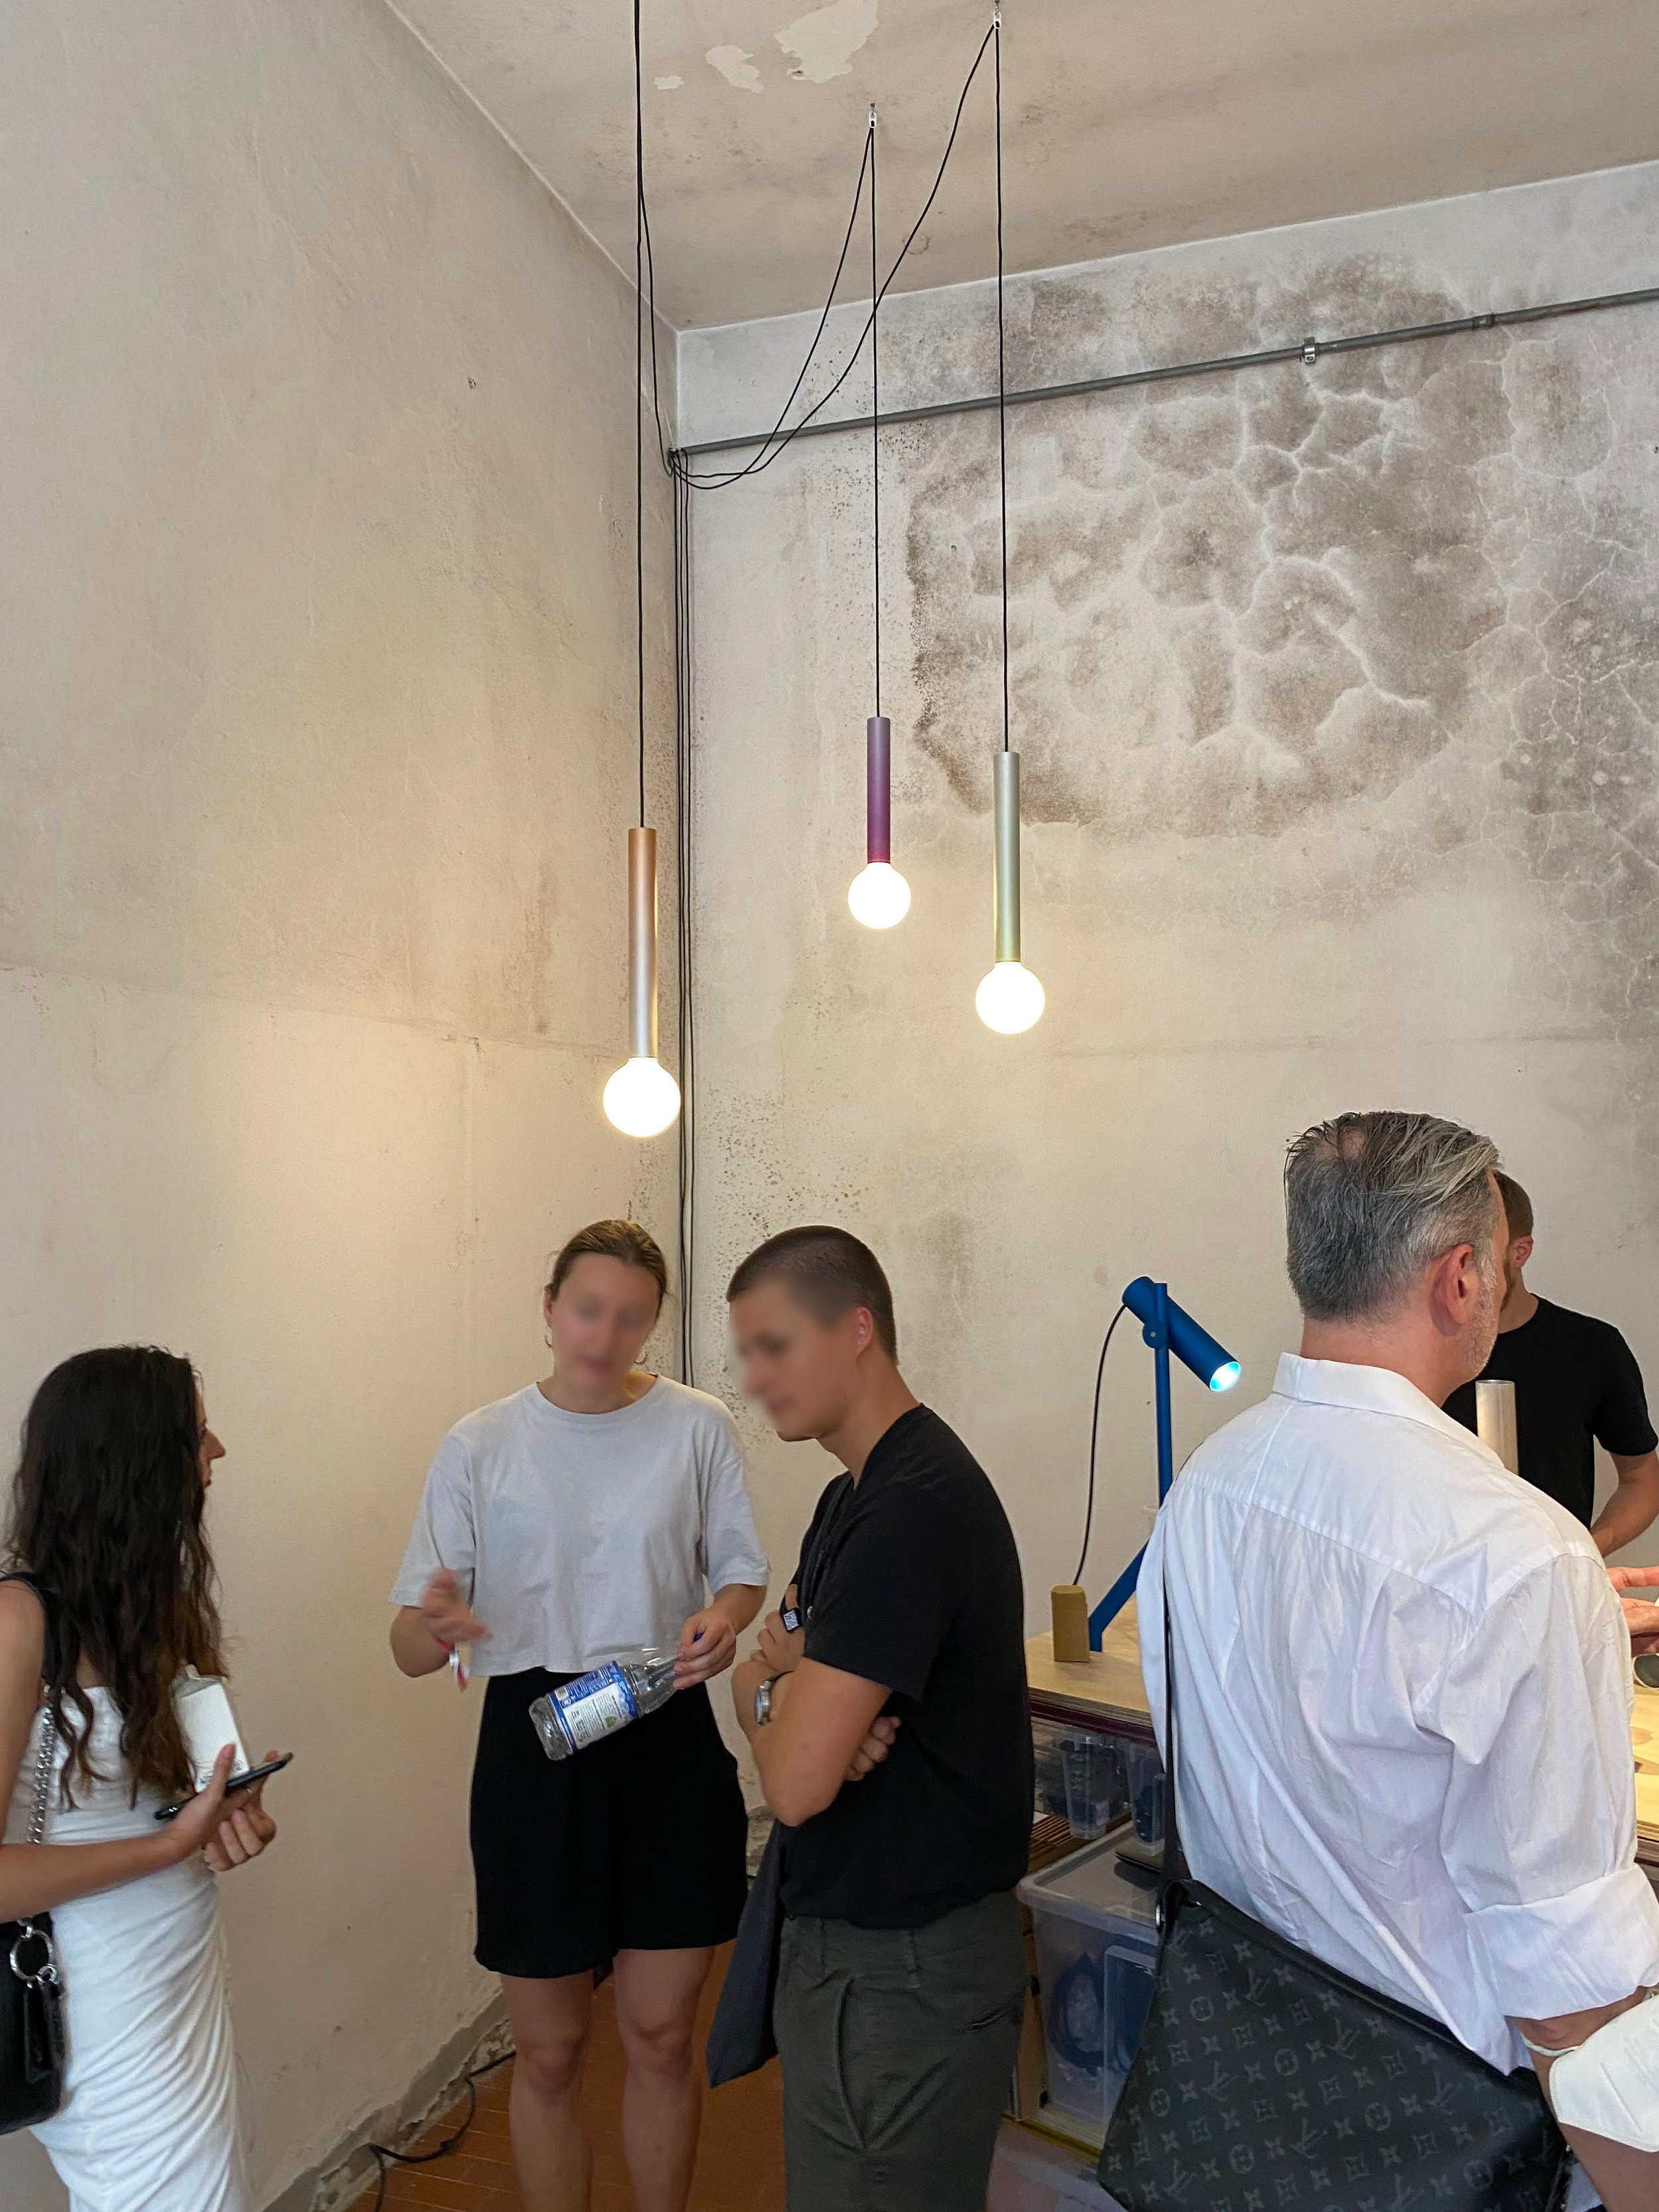  Image of three lights hanging from ceiling and a blue lamp on a table with people in foreground 